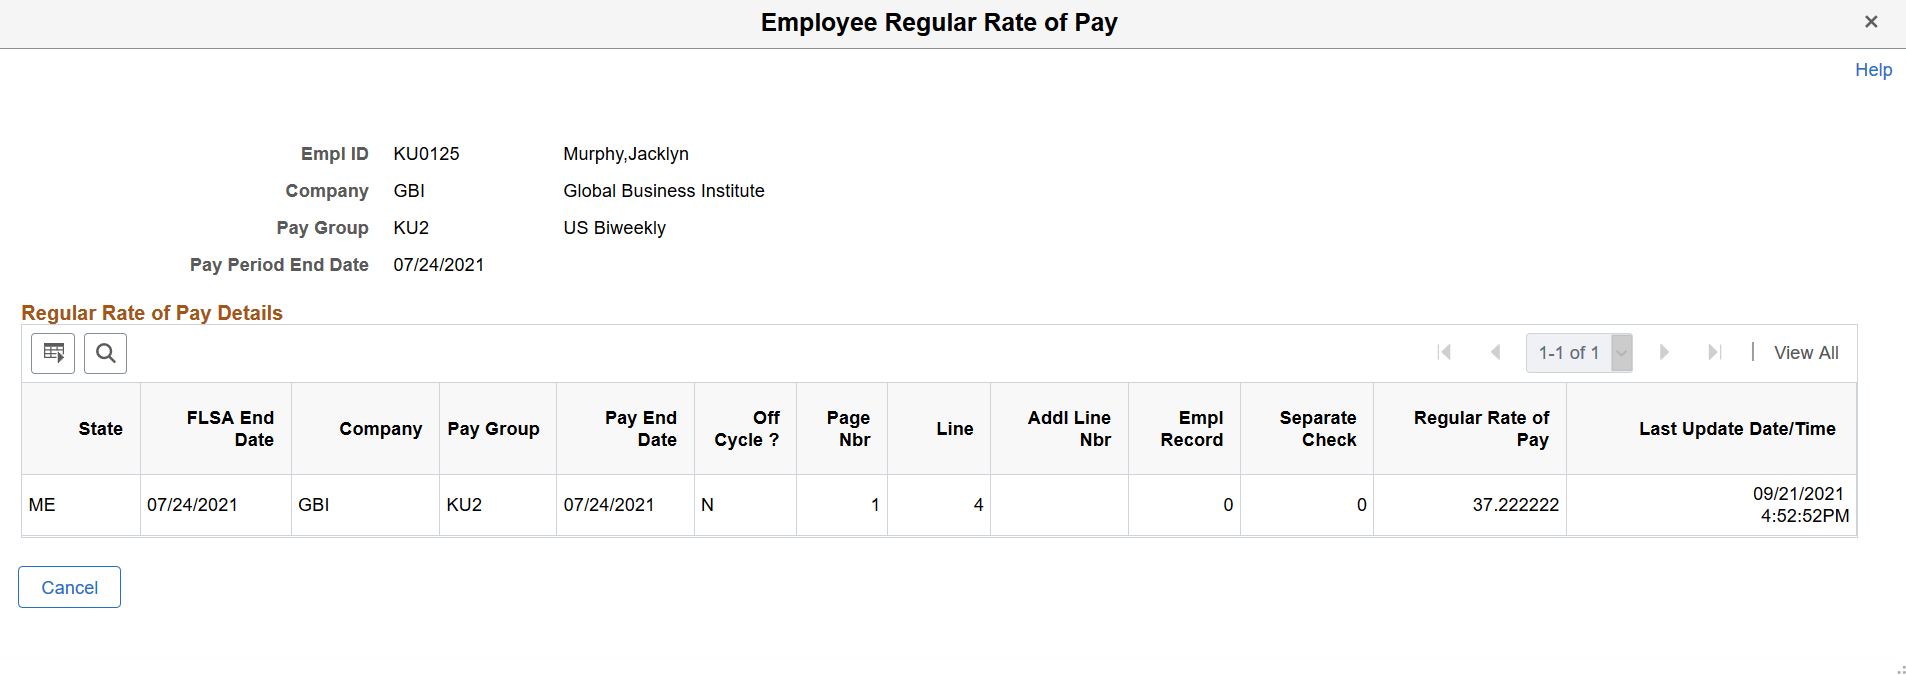 Calculated regular rate of pay for example 2